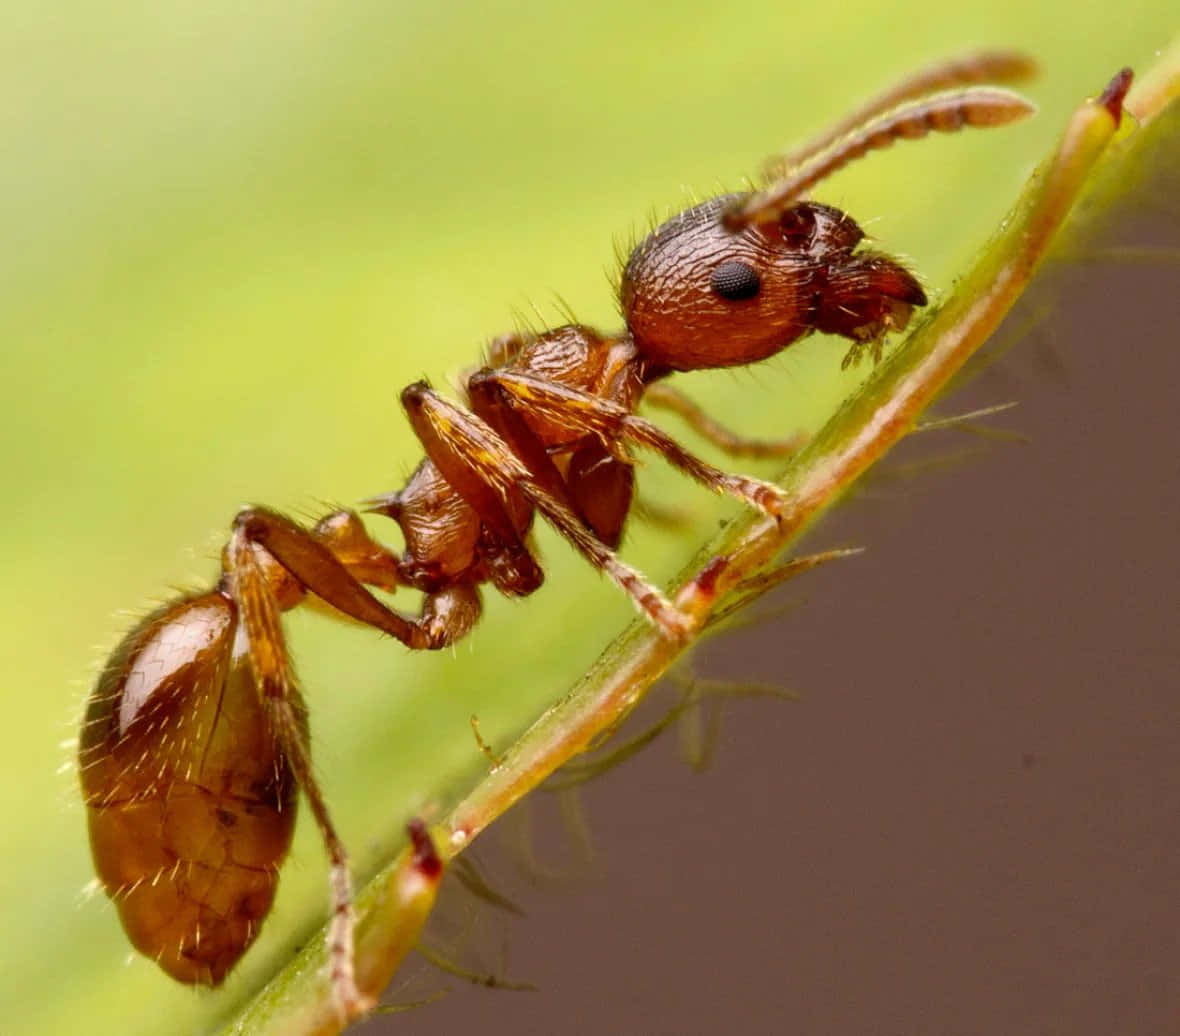 A Small Ant Is Sitting On A Leaf